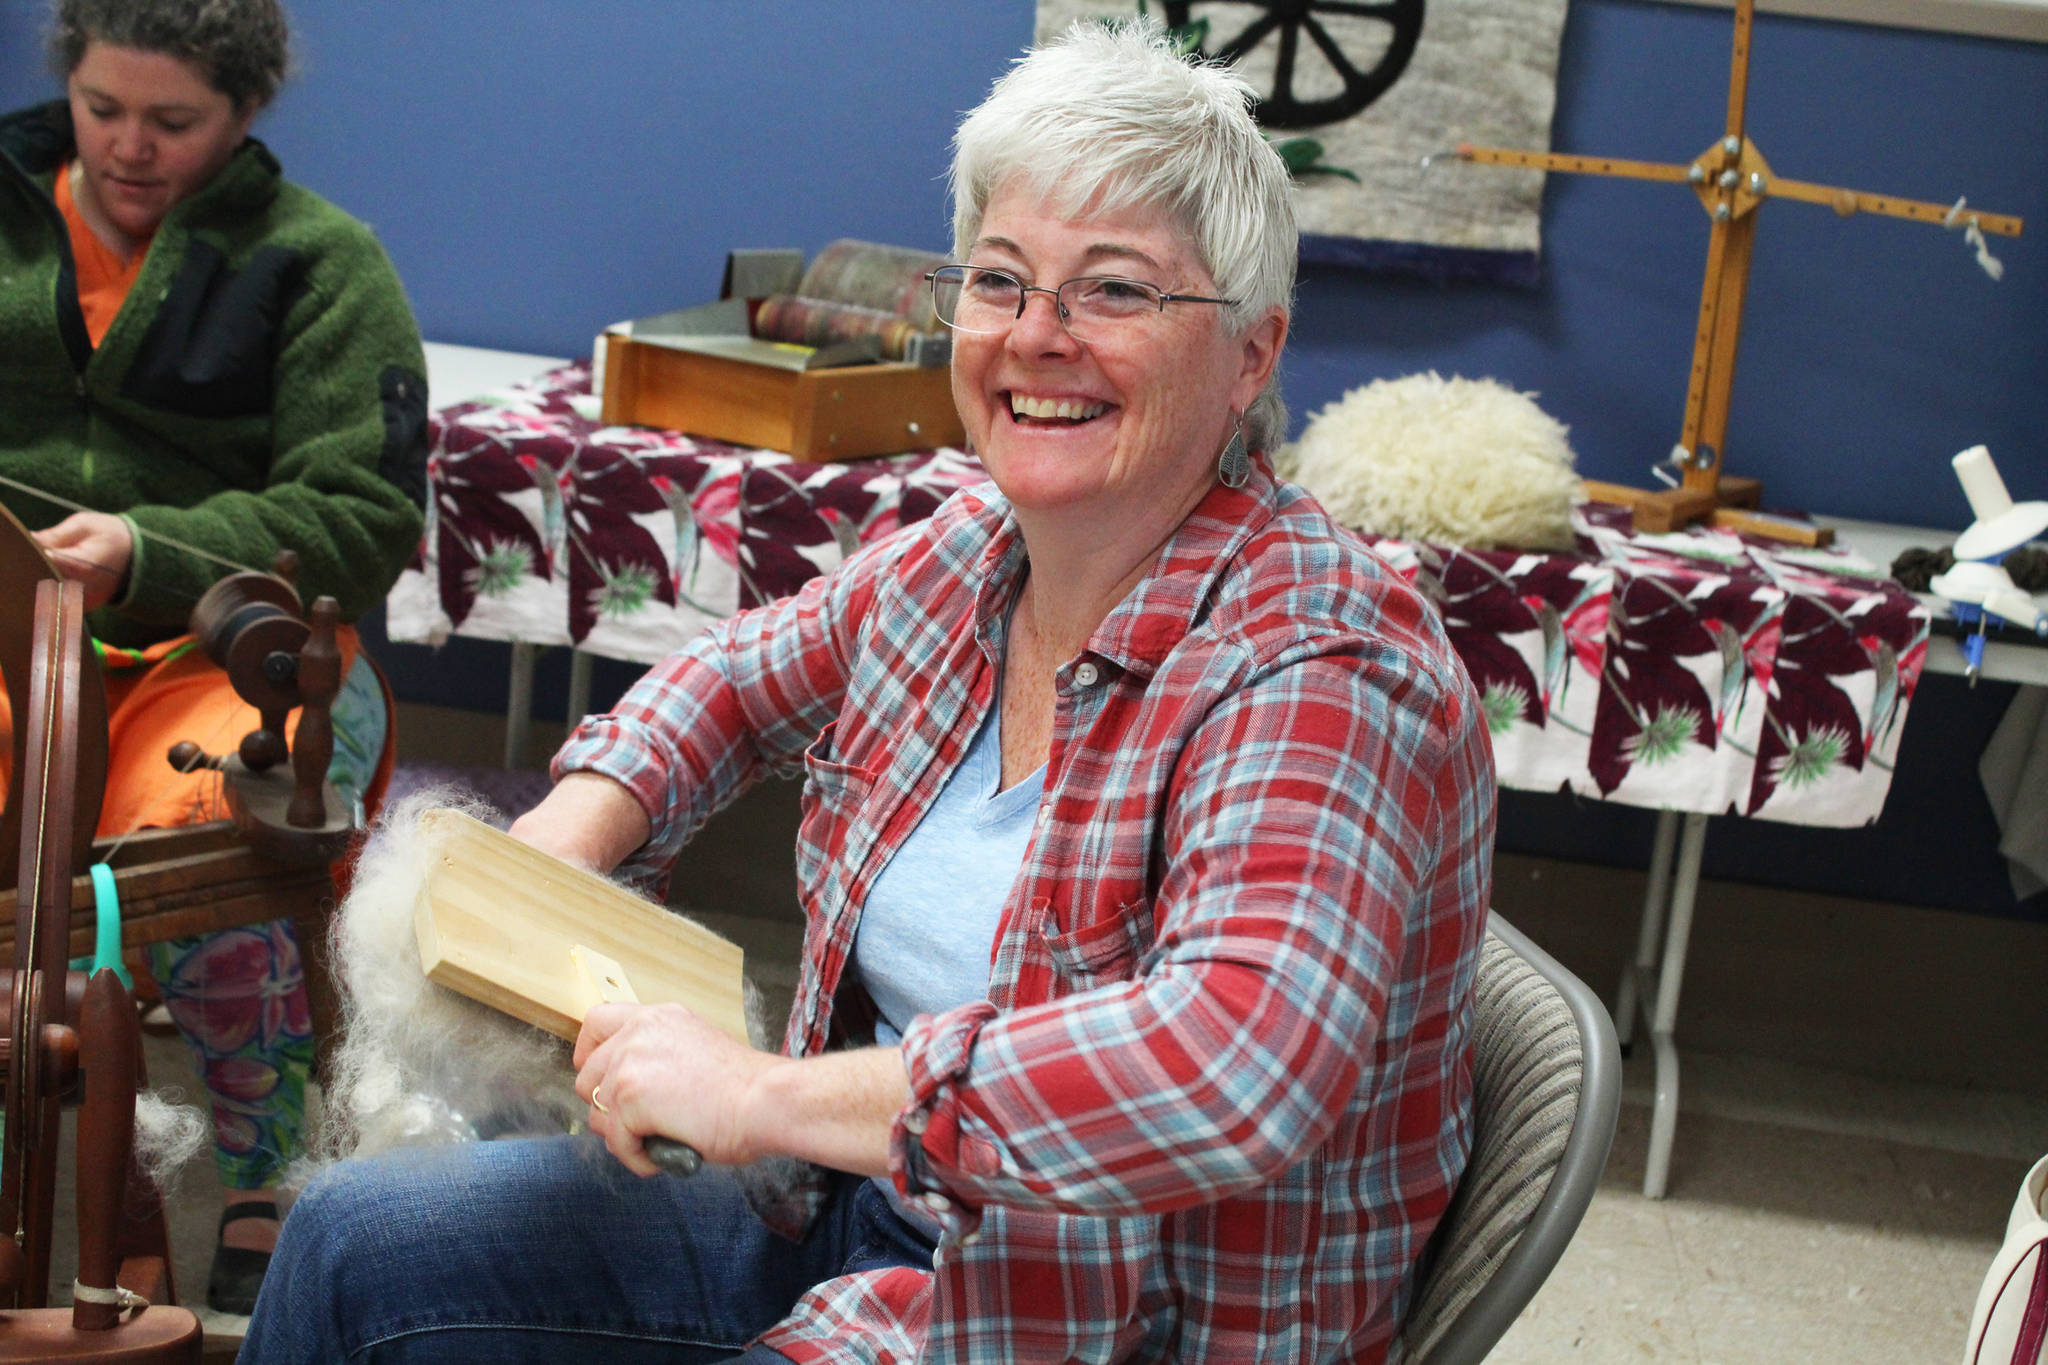 Karen Porter, a member of the Fireweed Fiber Guild, prepares some fibers while spinning yarn with other guild members Friday, Aug. 18, 2017 at this year’s Kenai Peninsula Fair in Ninilchik, Alaska. (Photo by Megan Pacer/Homer News)